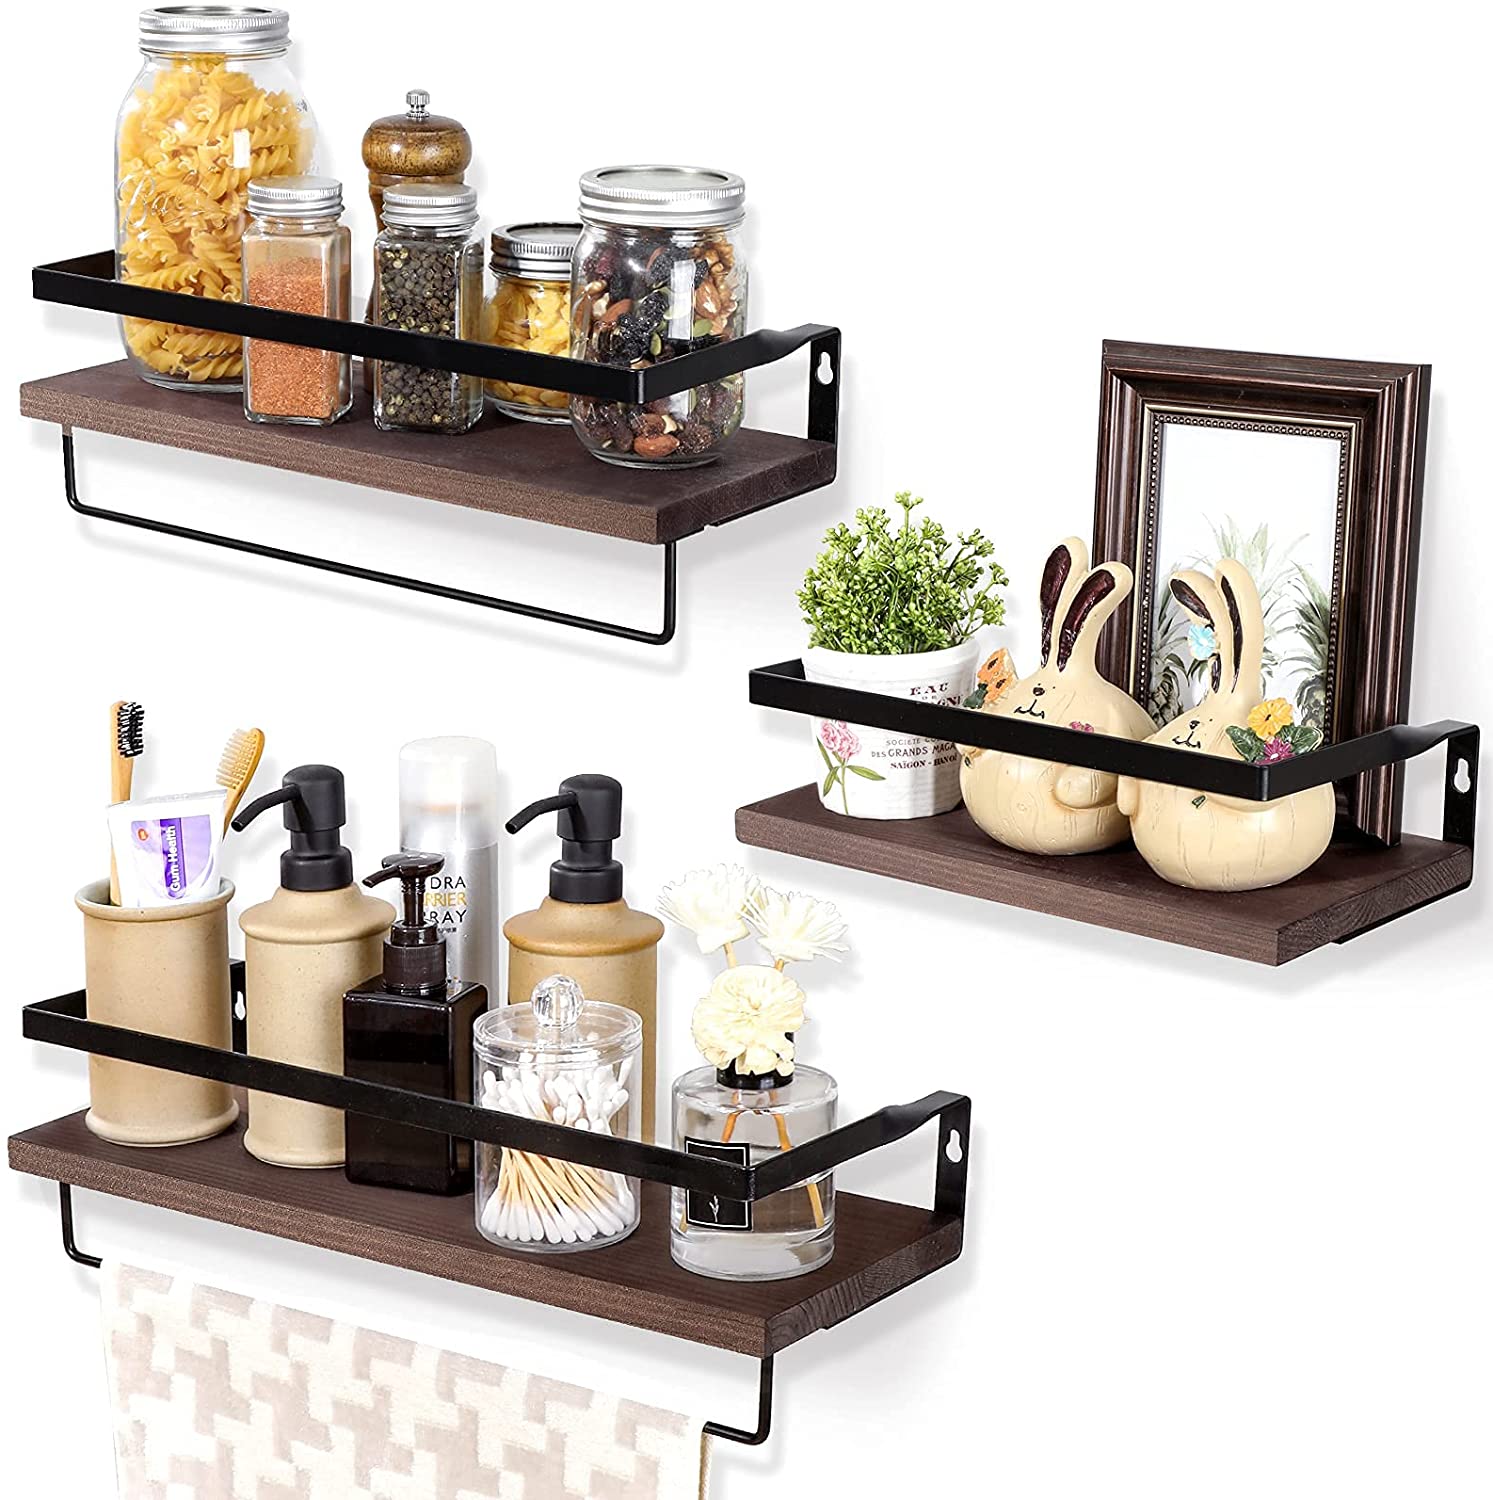 Wall Shelves Decor Accessories for Bathroom, Kitchen, Bedroom, Office, Over Toilet - Brown